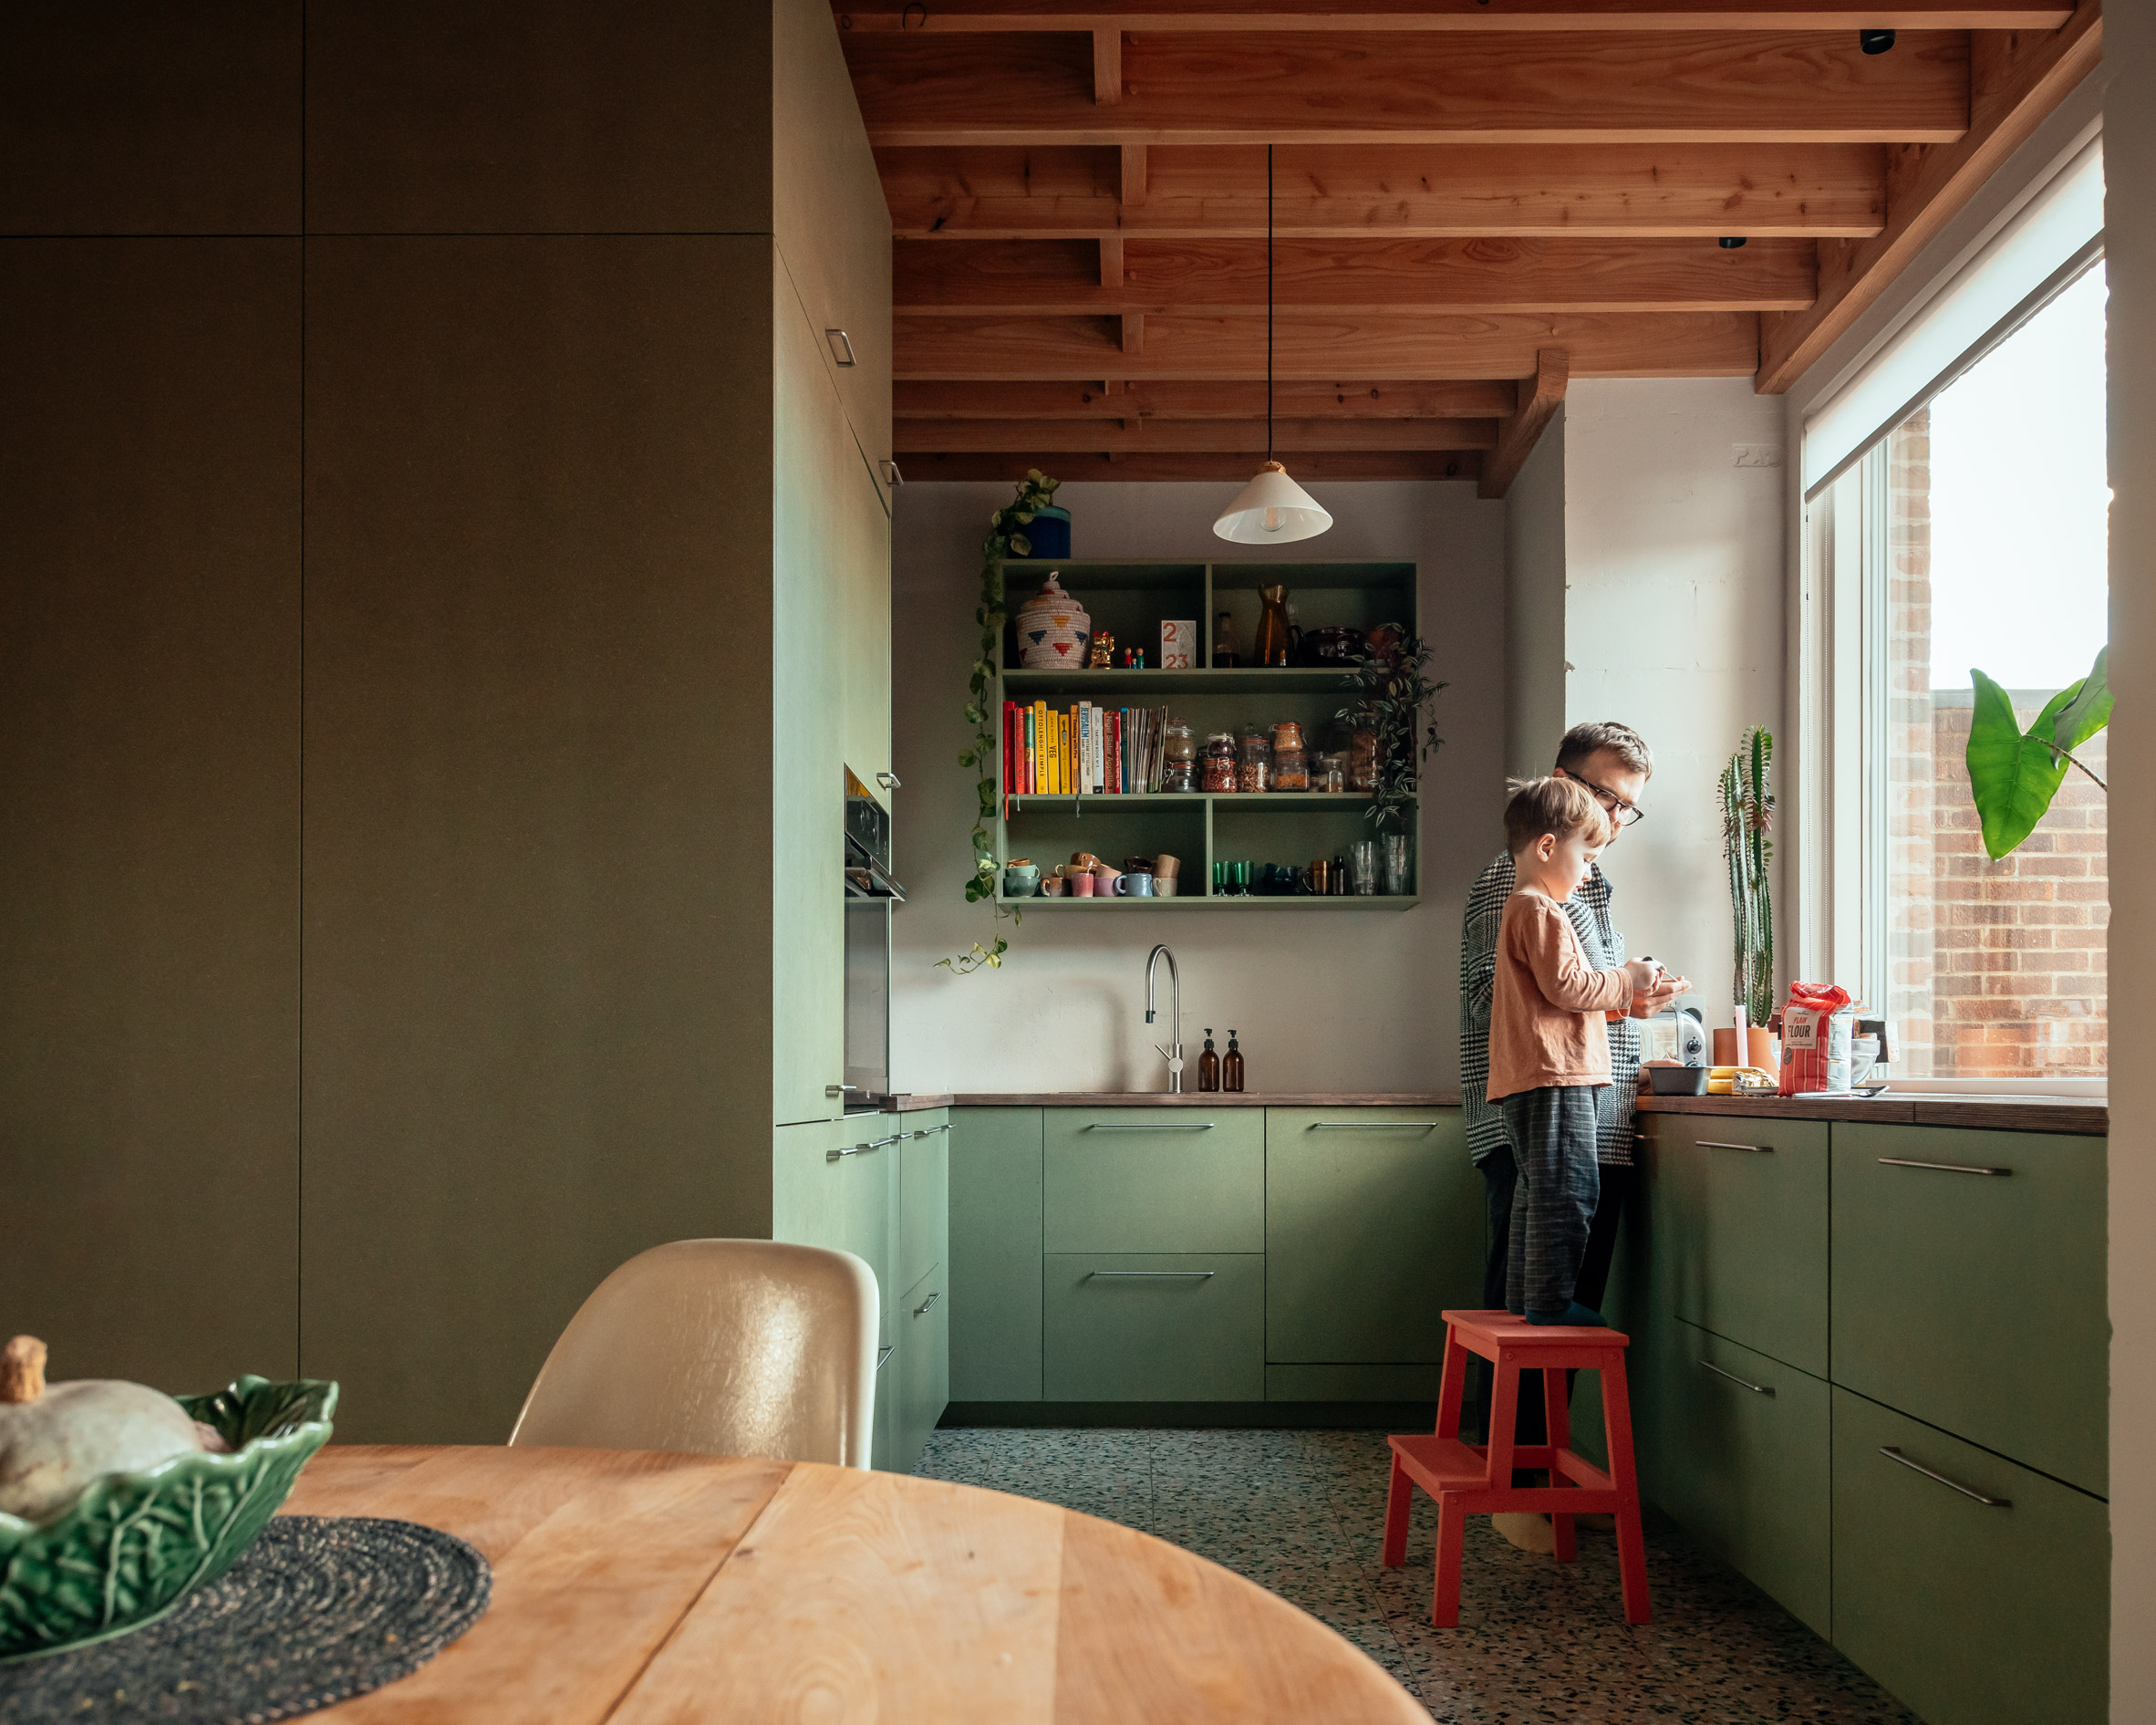 Kitchen with green cabinetry and timber roof